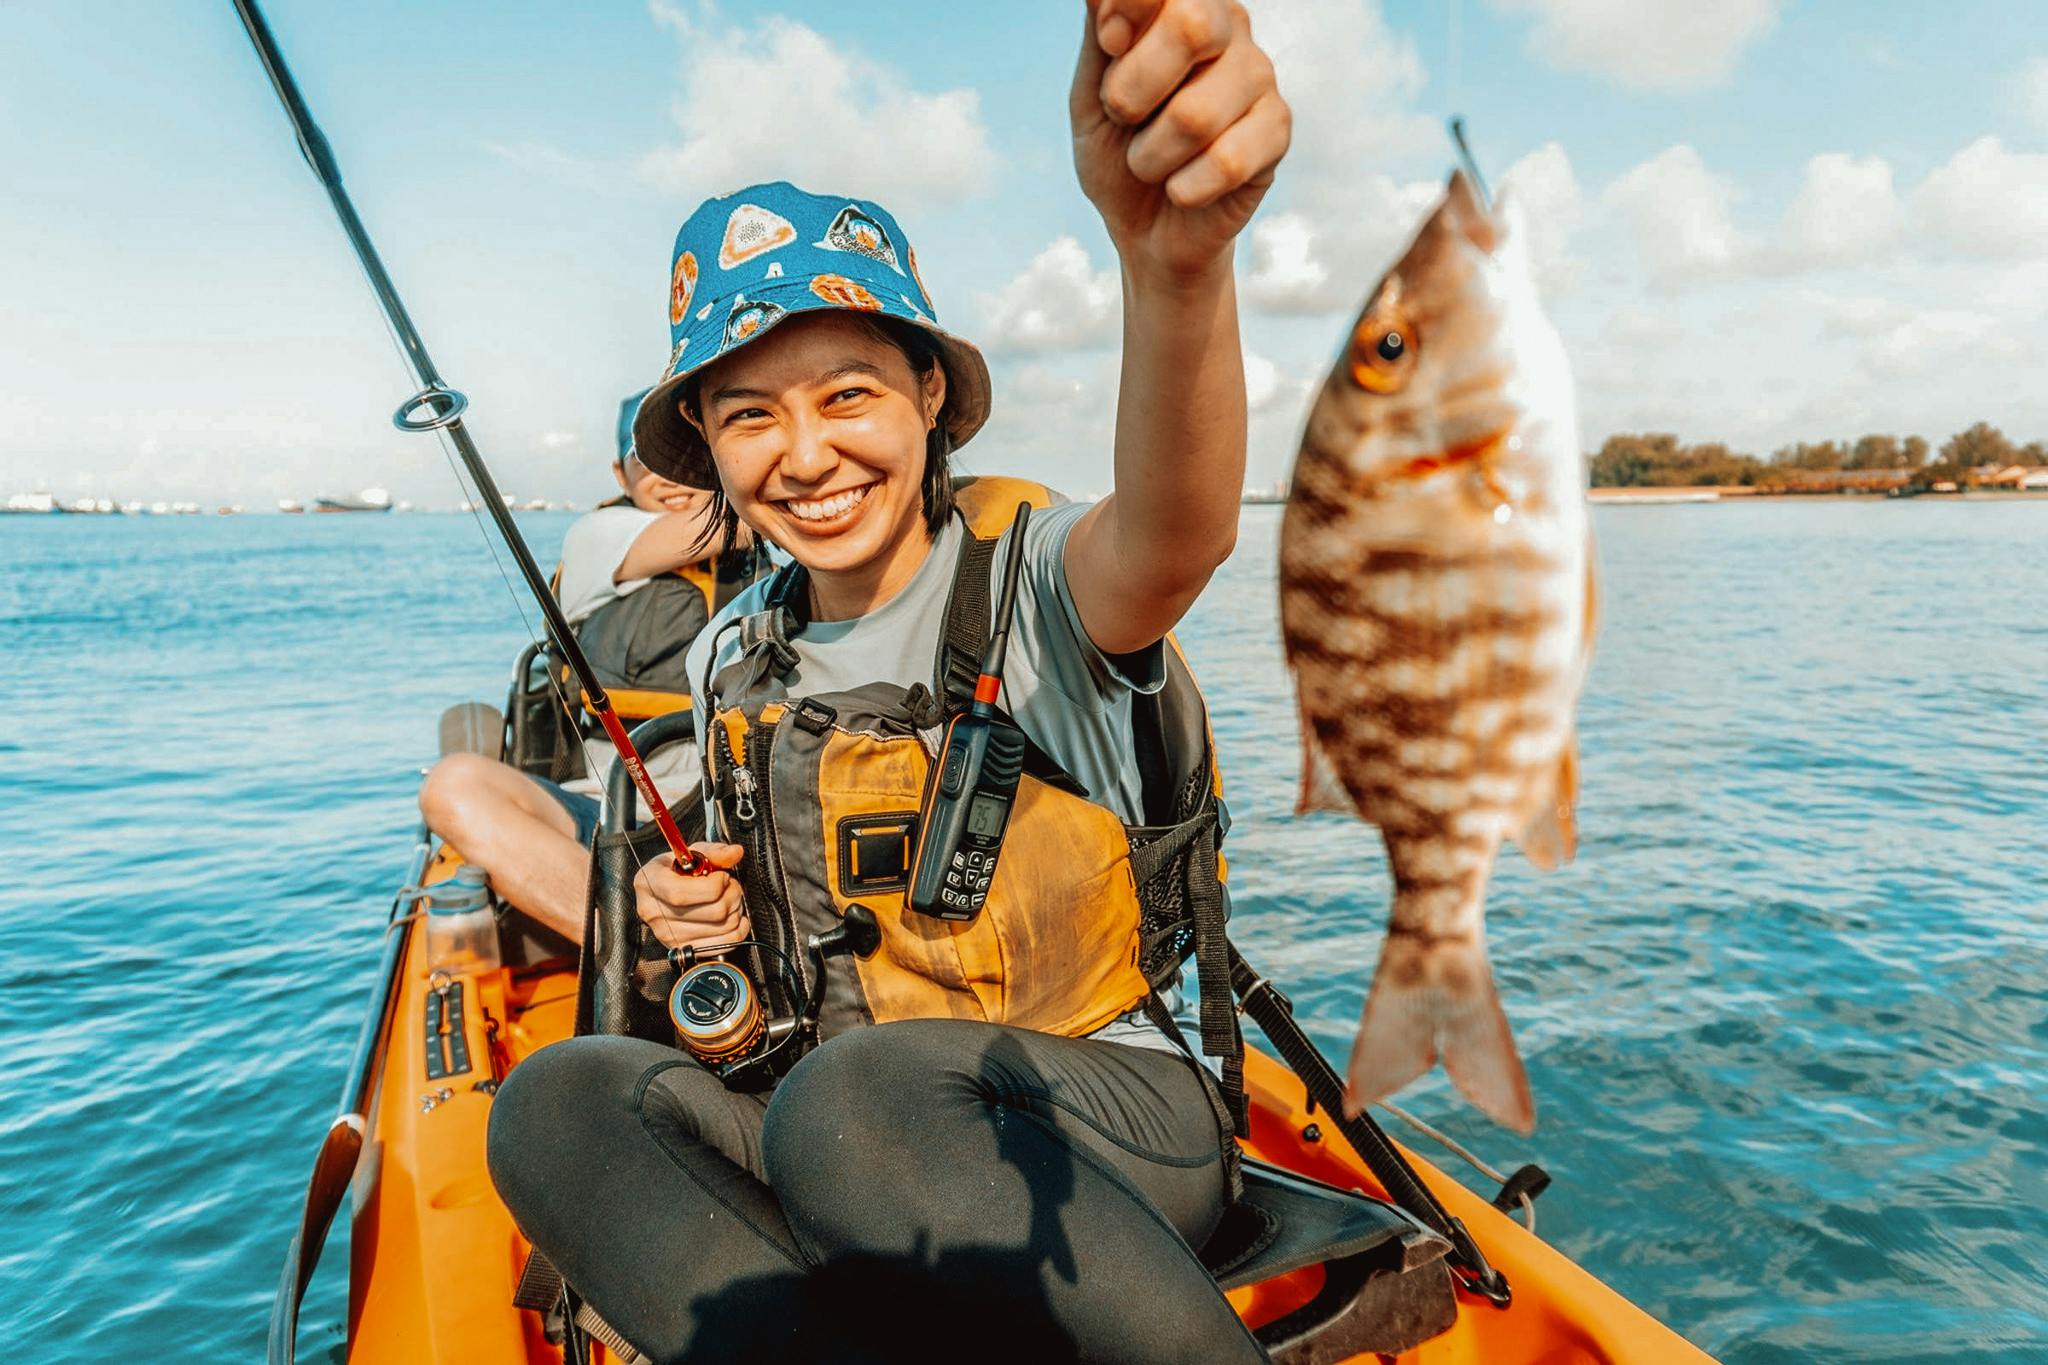 Singapore's waters are great to fish in - you can head out on a boat, try pier fishing or even kayak fishing